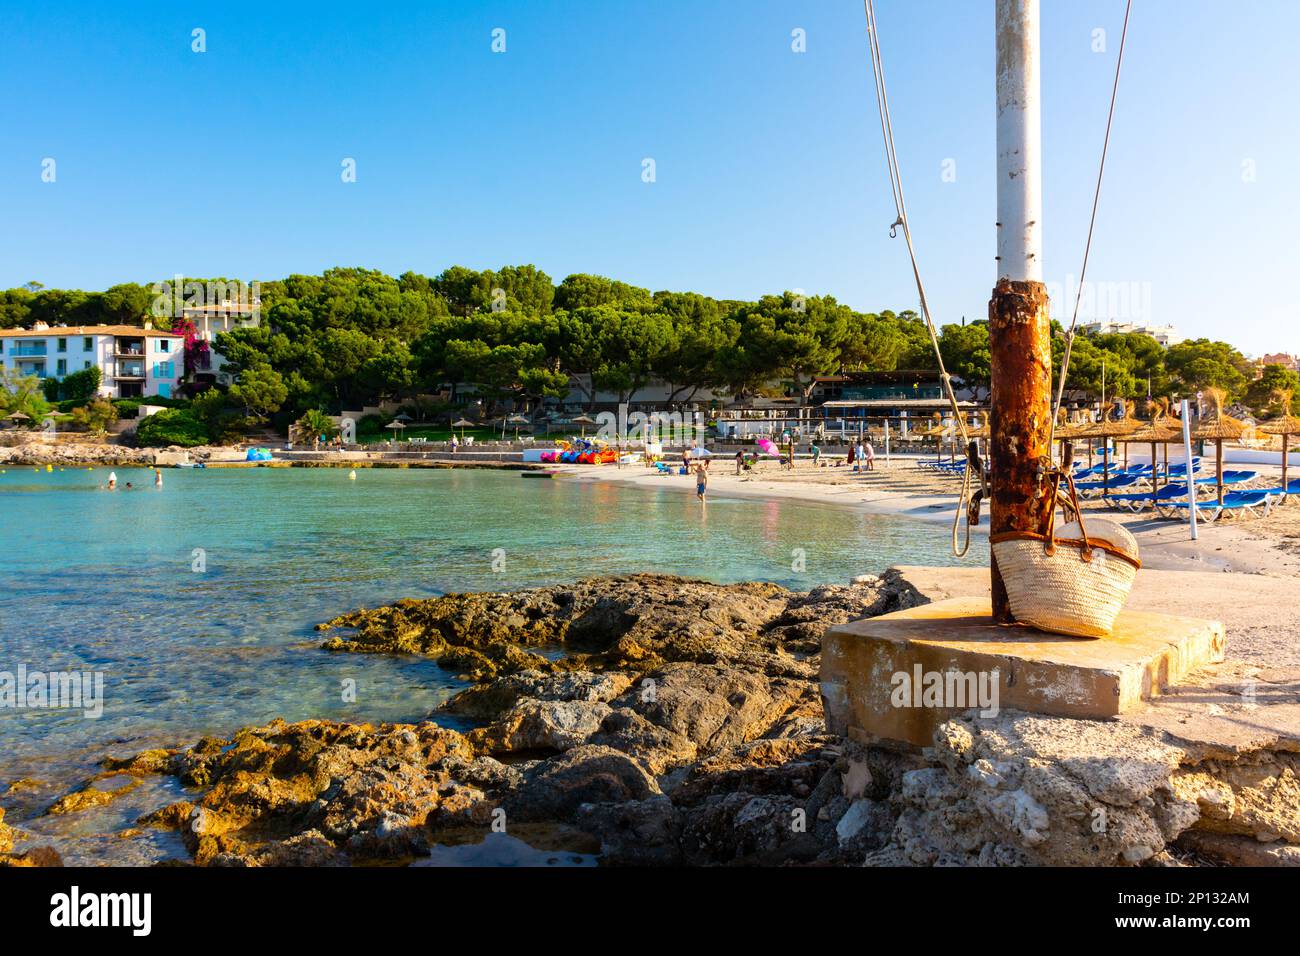 Cala Xinxell cove, Ses Illetes, Majorca, Balearic Islands, Spain. July 20th, 2022 - The cove with some apartments in a pinewood next to the rocky coas Stock Photo